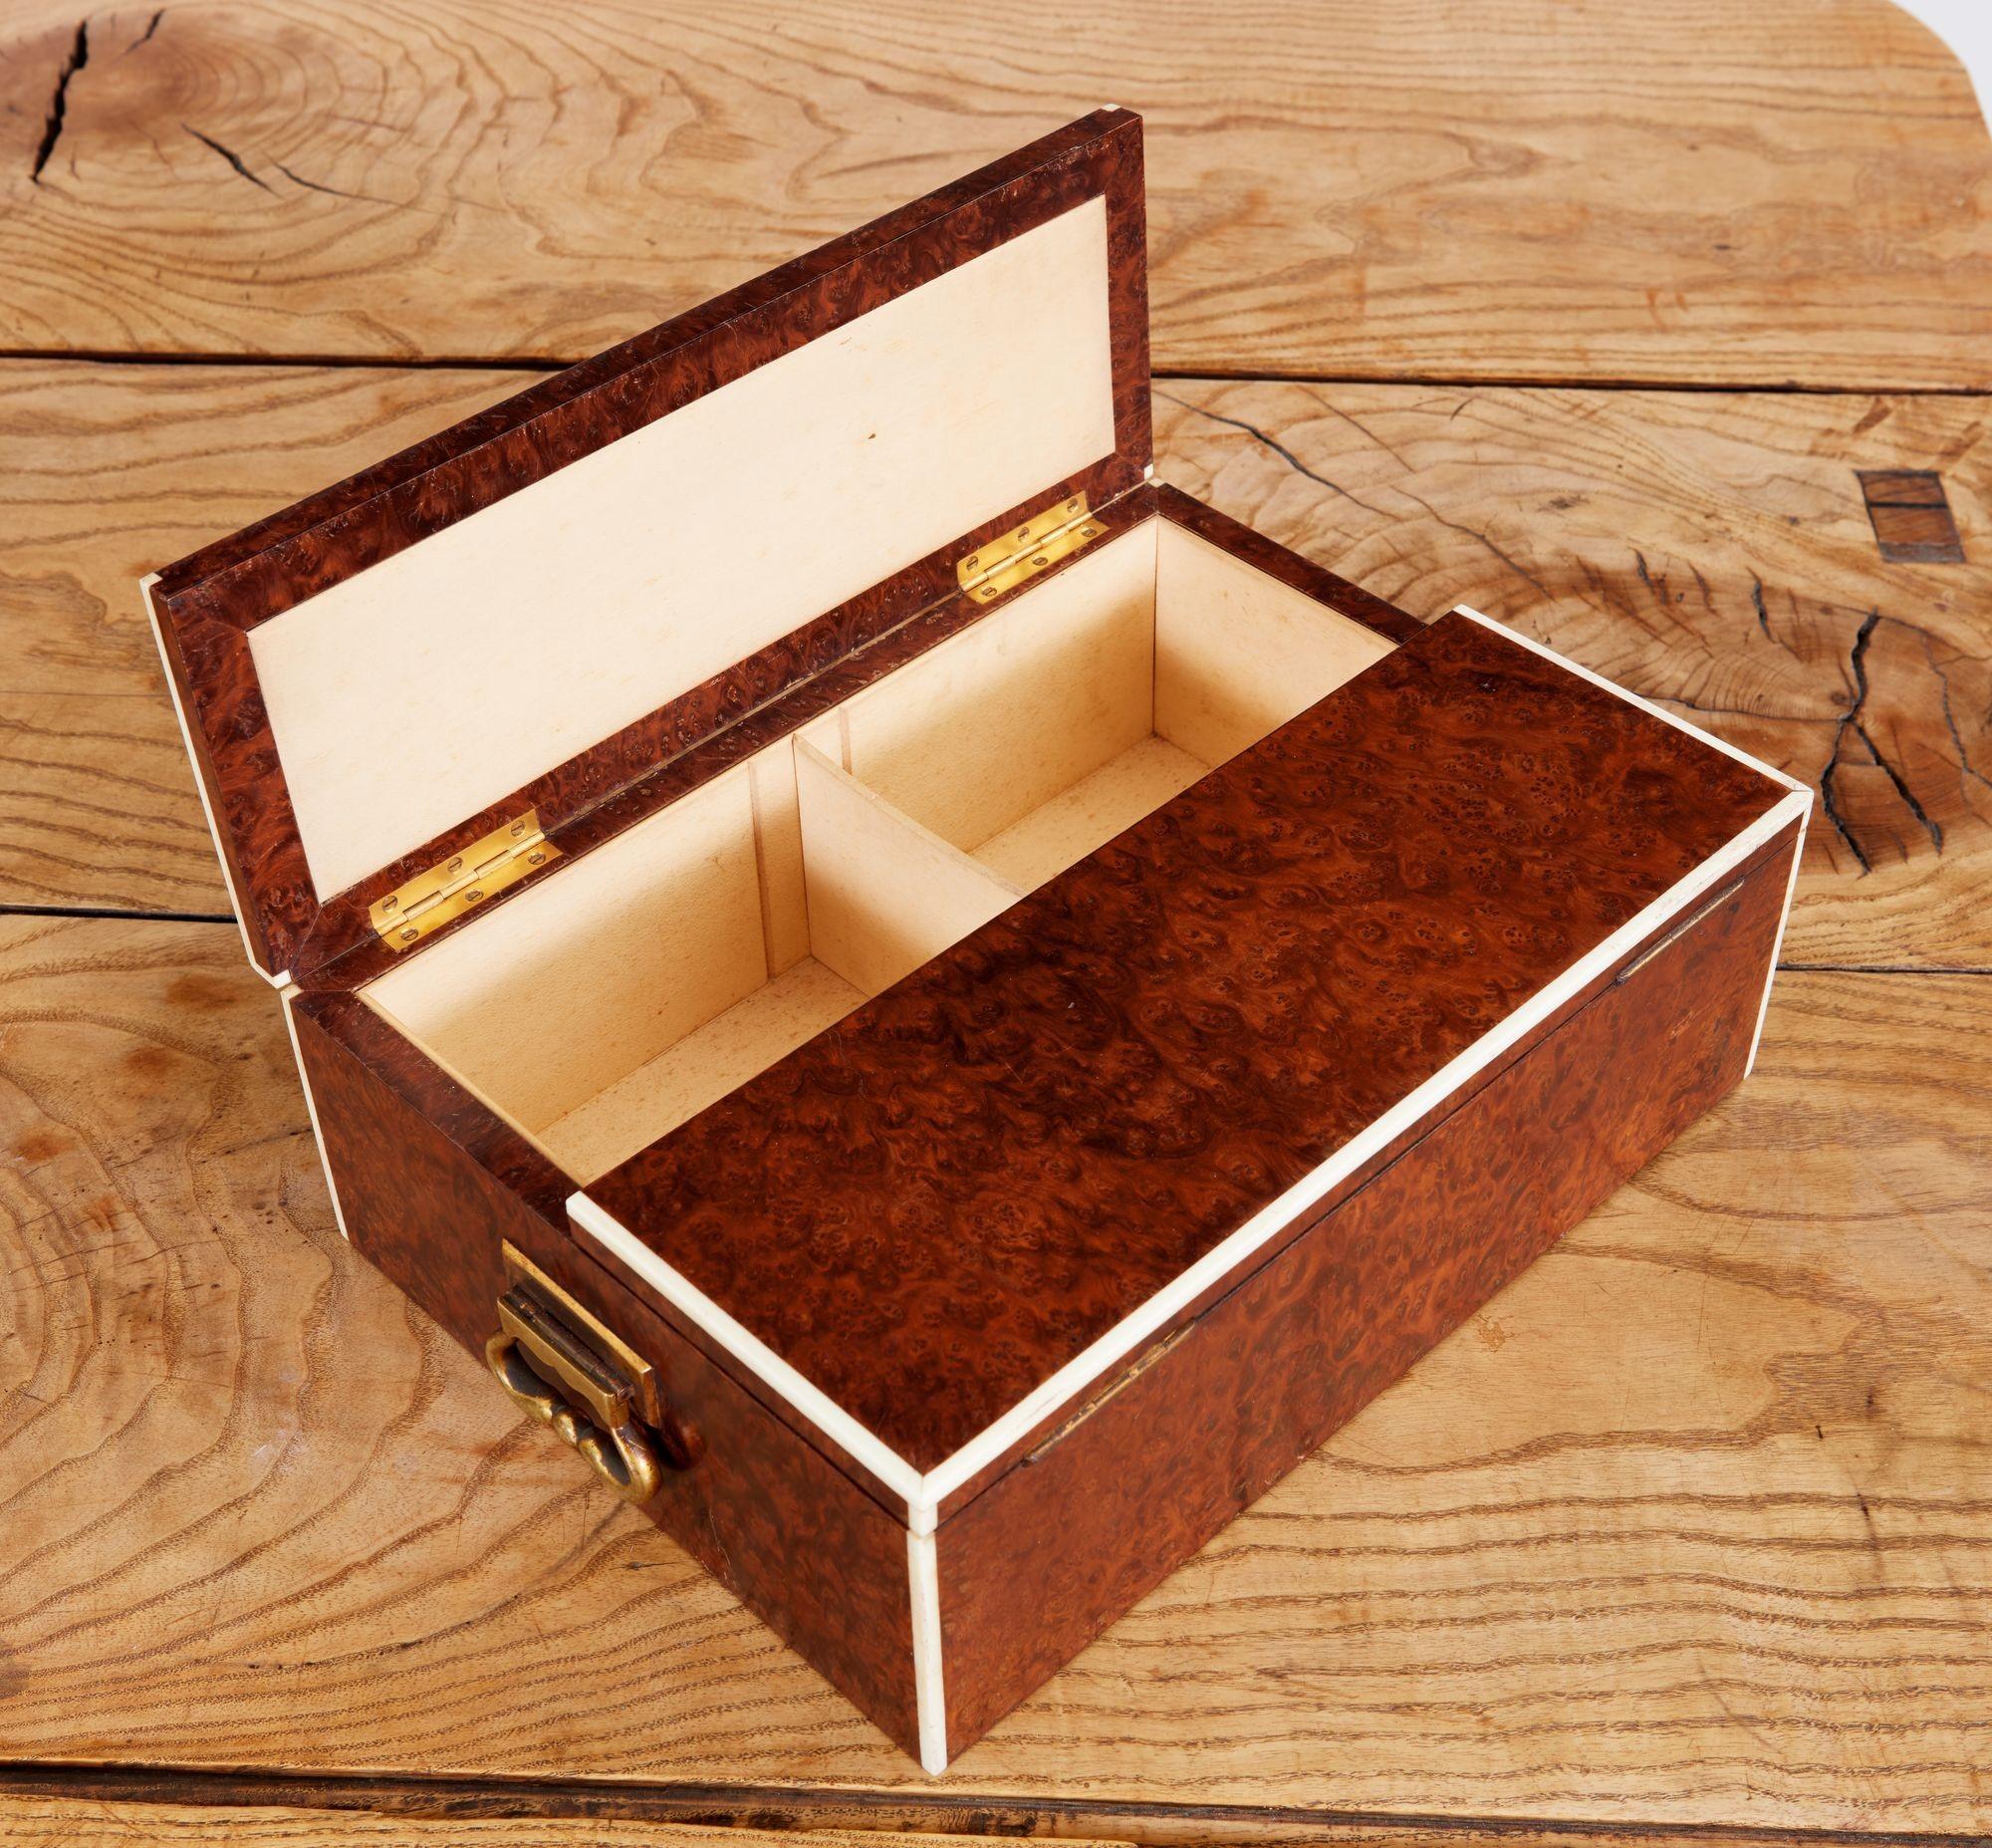 Very fine early 20th century humidor fashioned from solid amboyna burl with bone trim and lacquered brass carrying handles, by Callow of Mount Street, having sycamore lined interior, the underside with inset label reading 